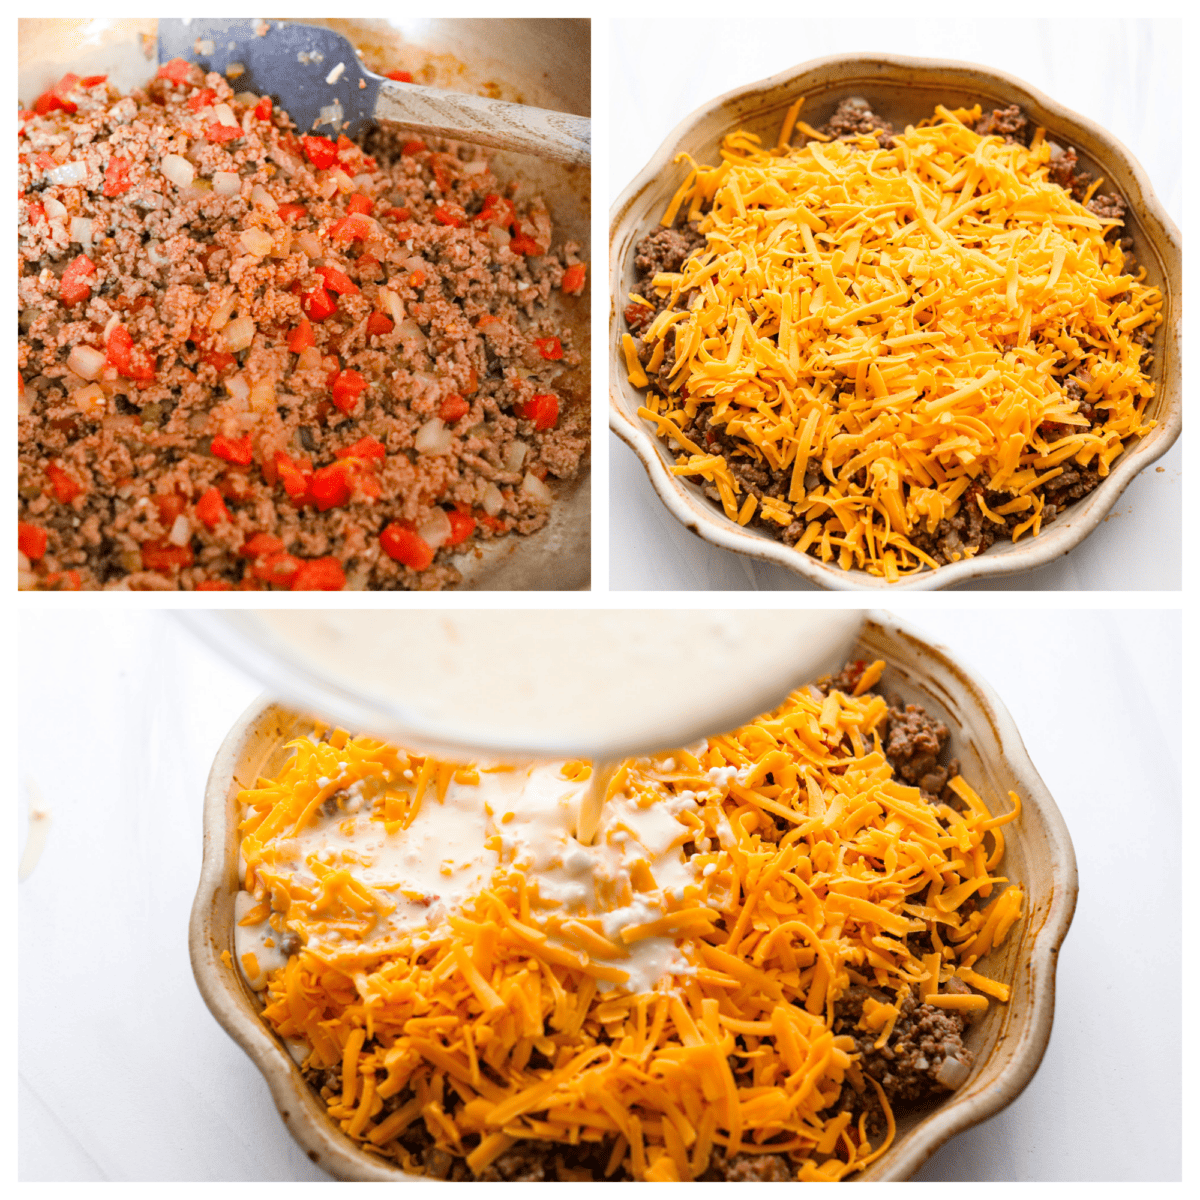 First photo of the meat mixture in a skillet. Second photo of cheese sprinkled on top of the pie. Third photo of the Bisquick mixture pouring on the pie.